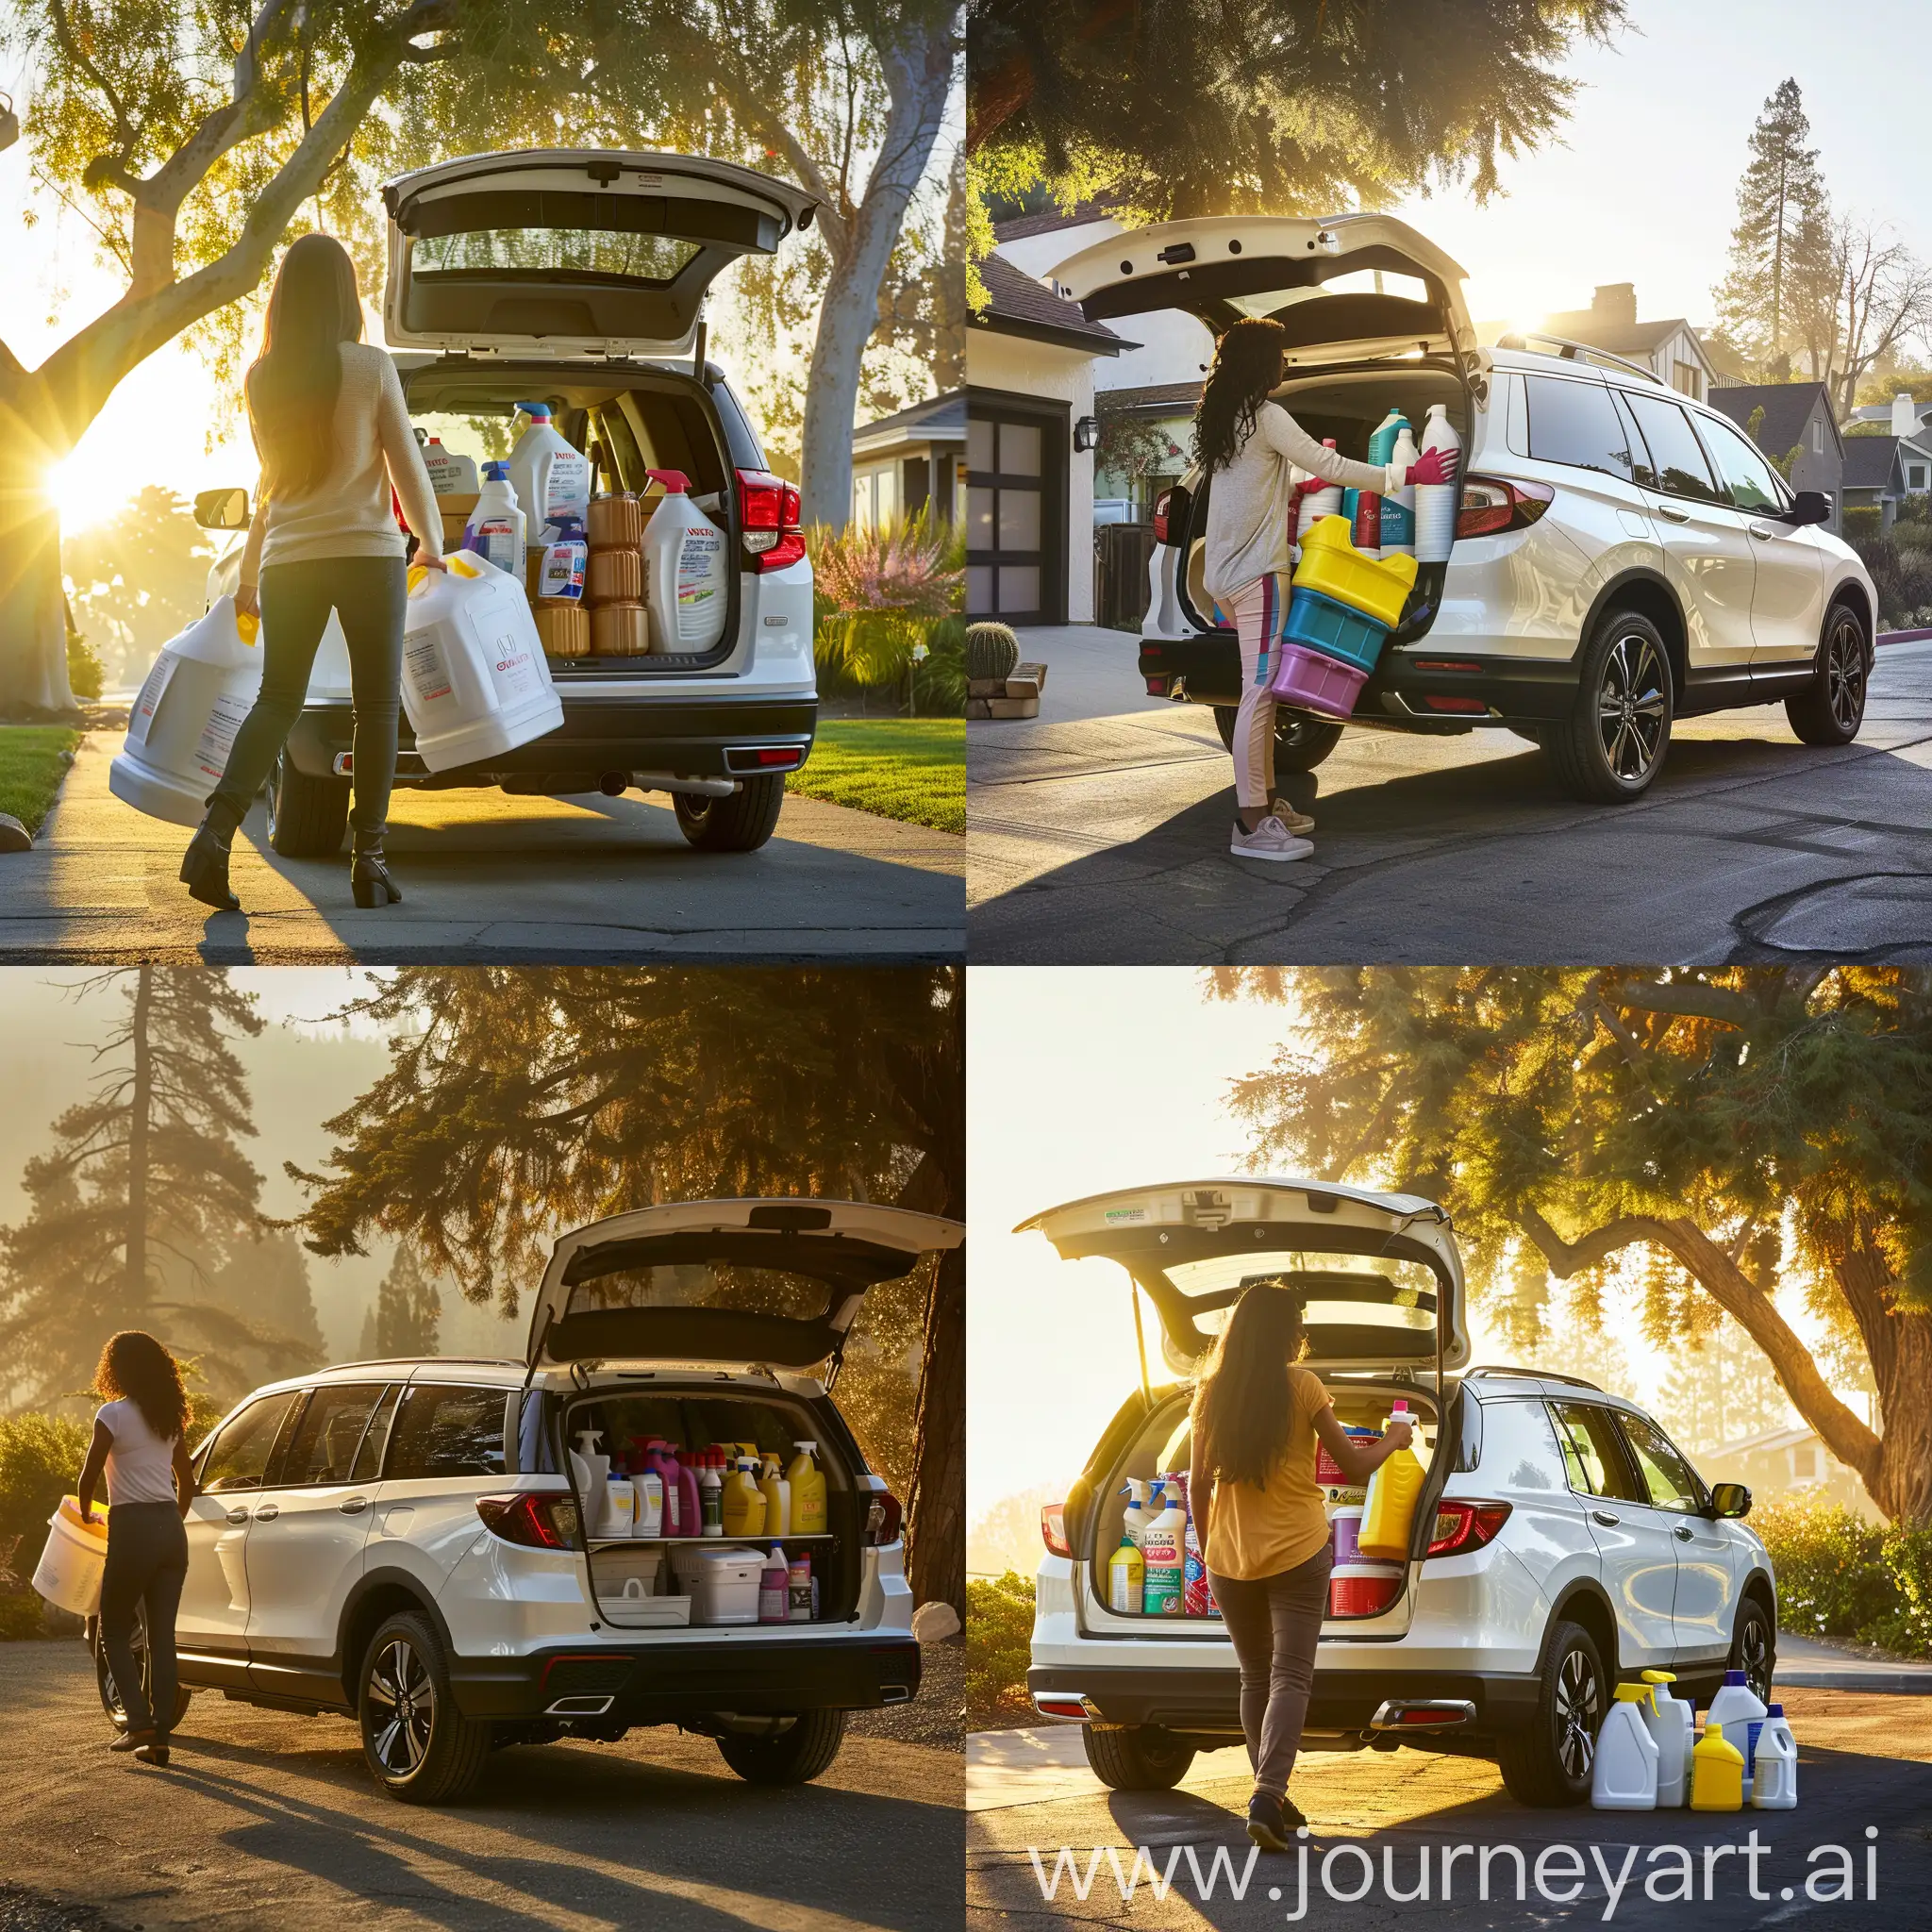 Morning-Unloading-Woman-Organizing-Cleaning-Supplies-from-White-Honda-Pilot-SUV